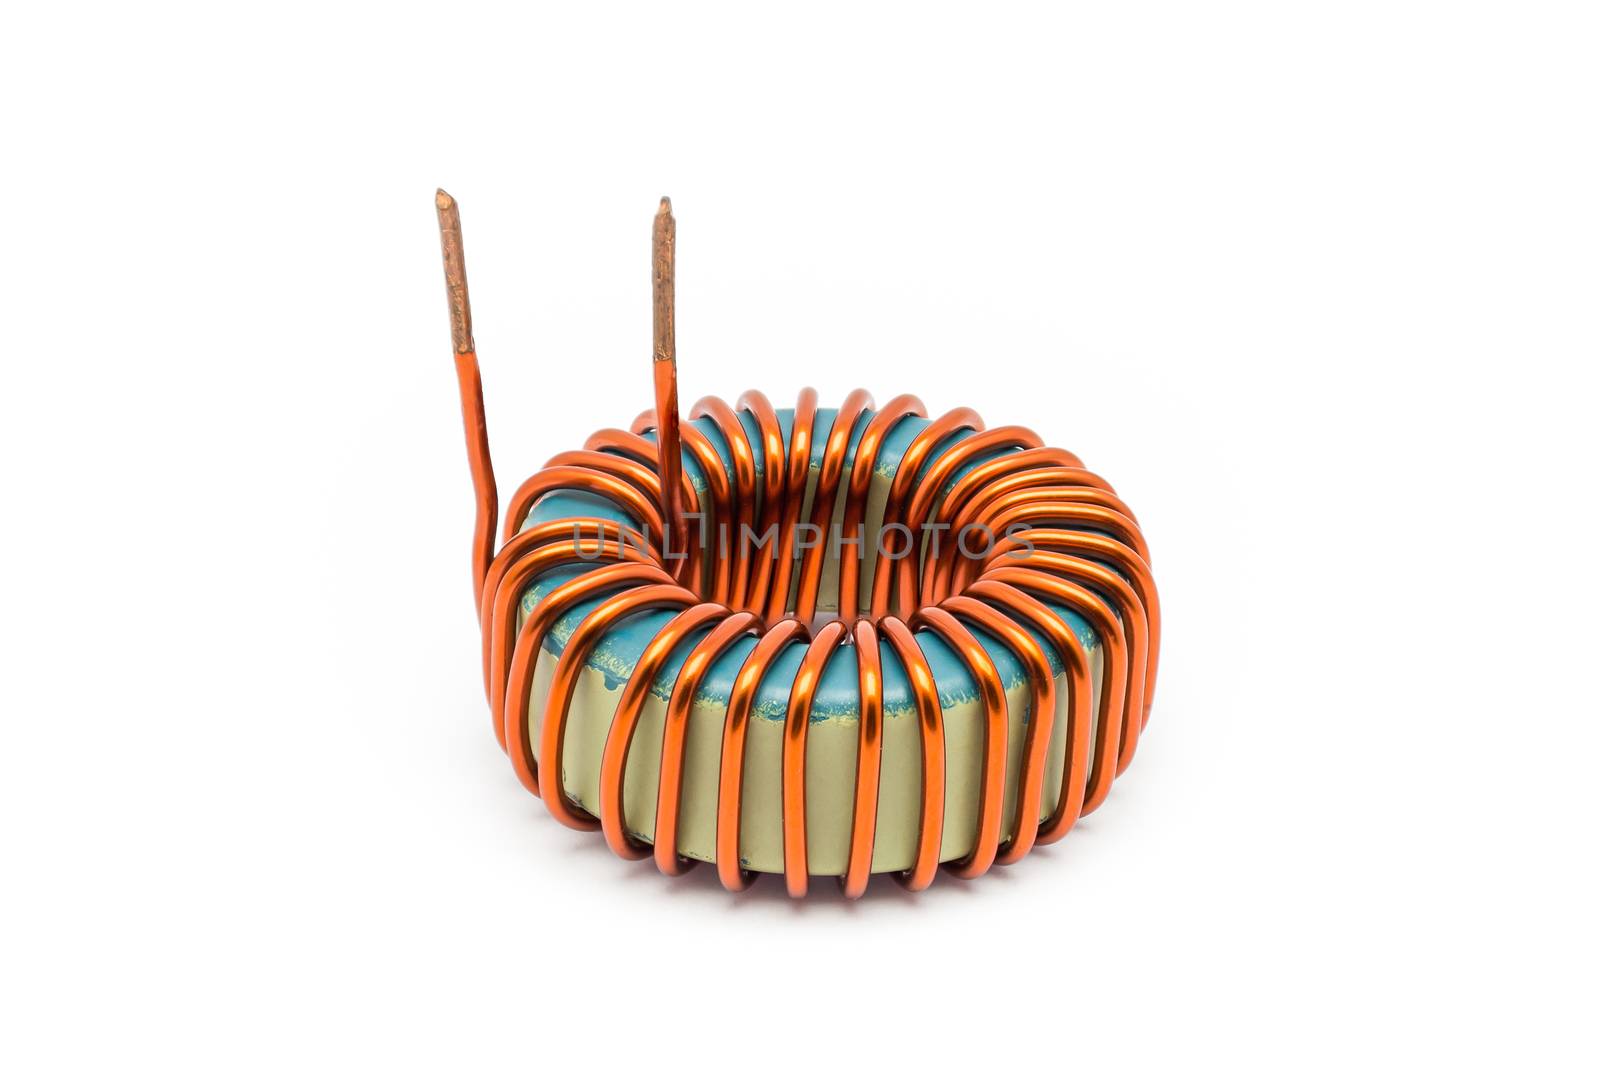 Ferrite Torroid Inductor for Switching Power Supply by noneam